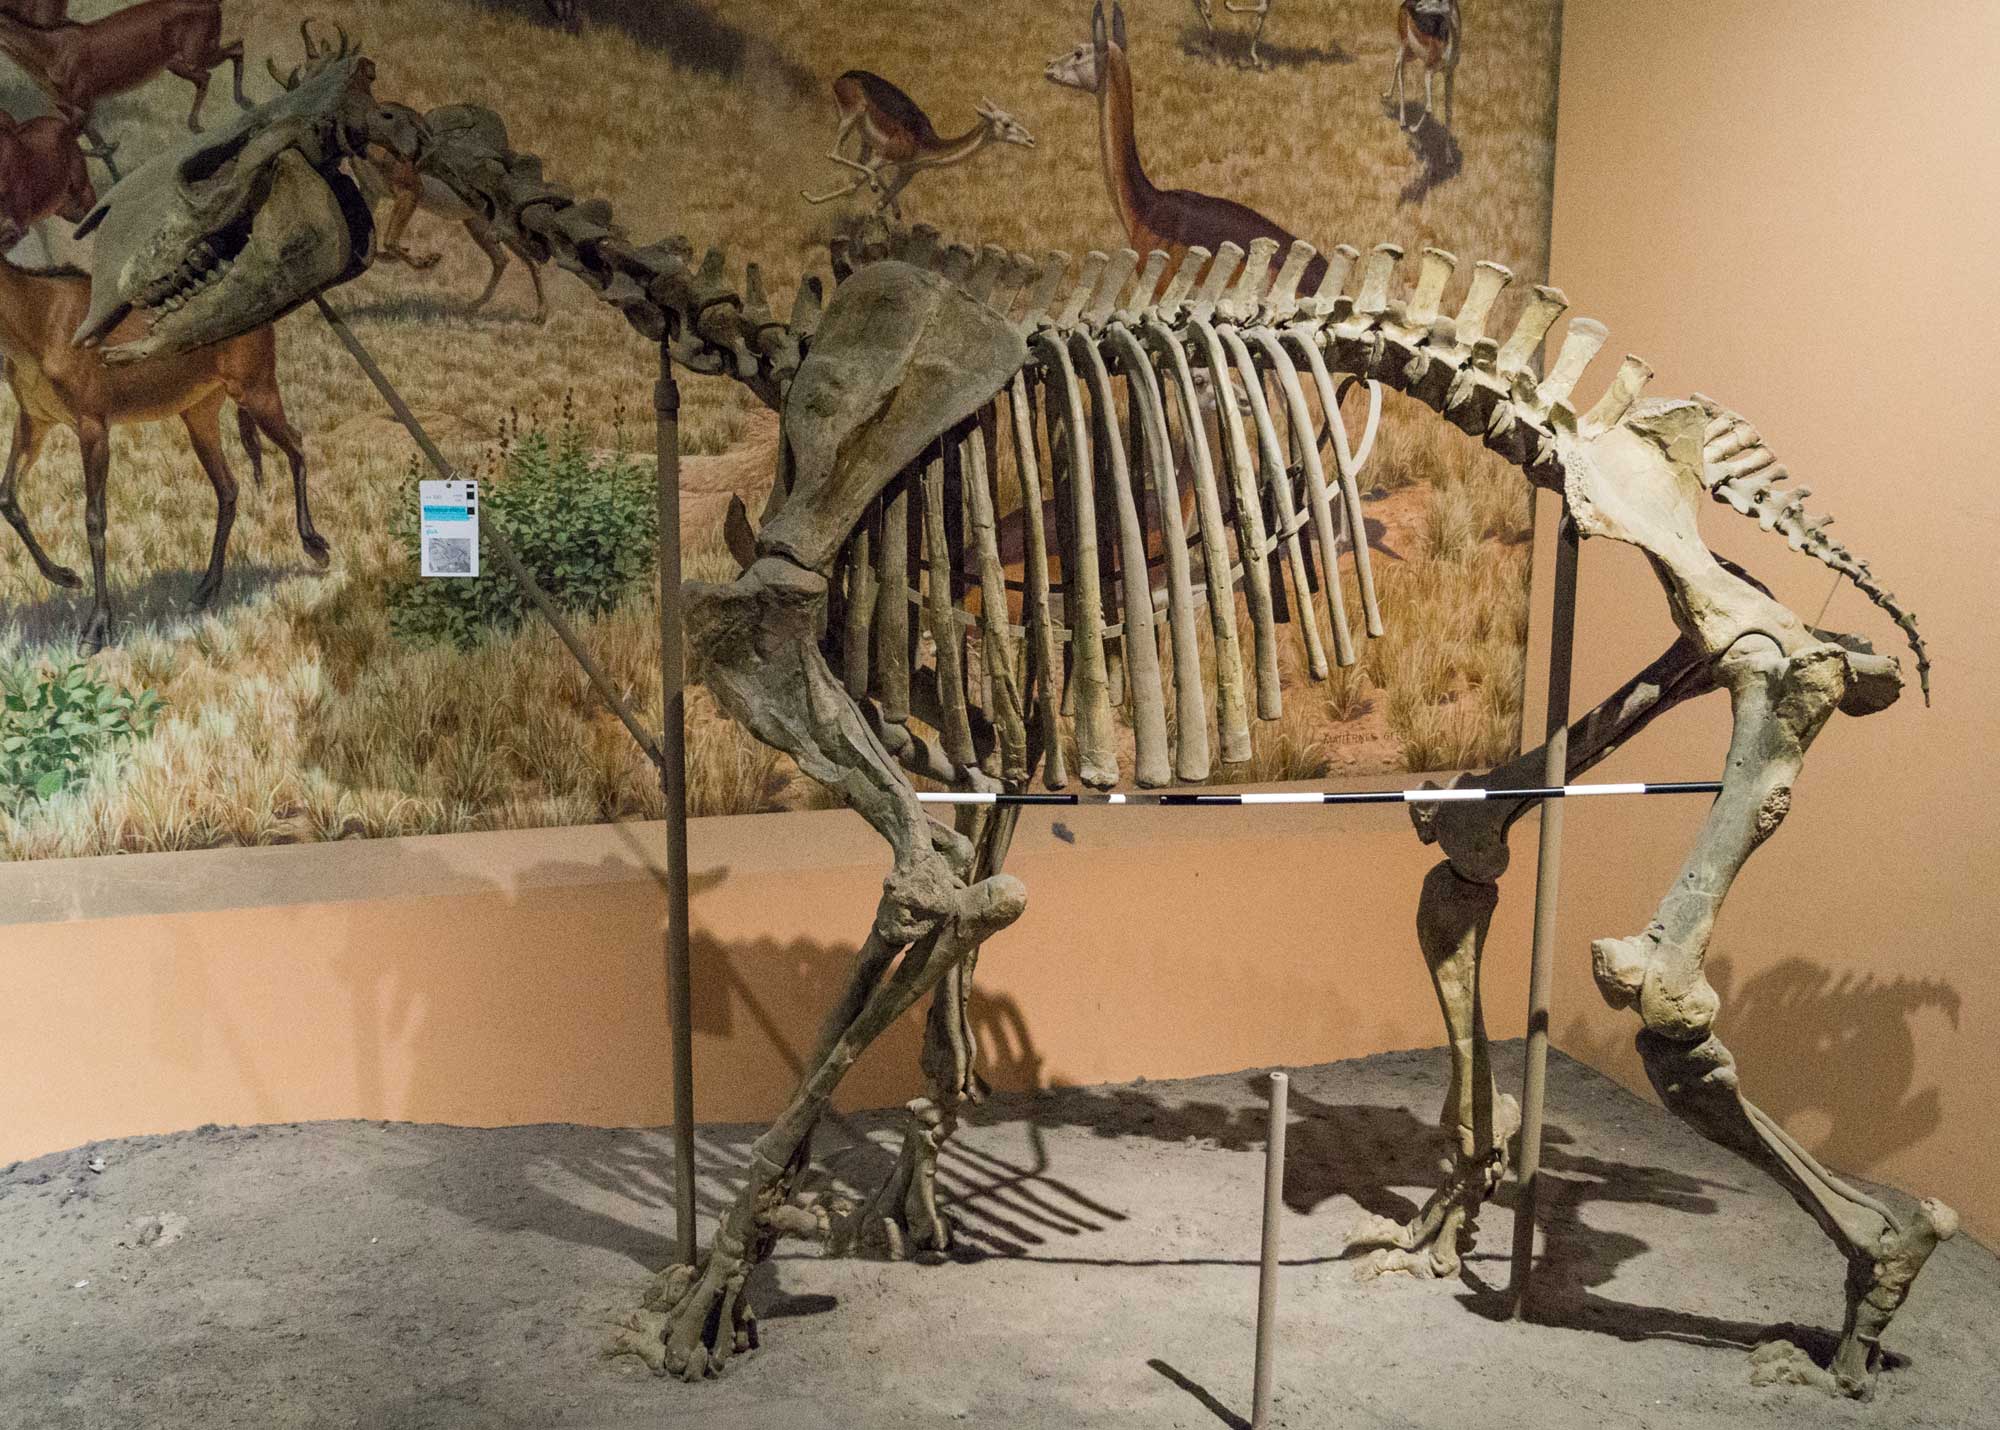 Photograph of a Moropus elatus skeleton from the Miocene Harrison Formation of Nebraska on display in a museum. The photo shows a large mammal skeleton. The animal stands on four relatively long legs. The tail is short, the neck elongated. The head is robust. This animal was an odd-toed ungulate and a herbivore.